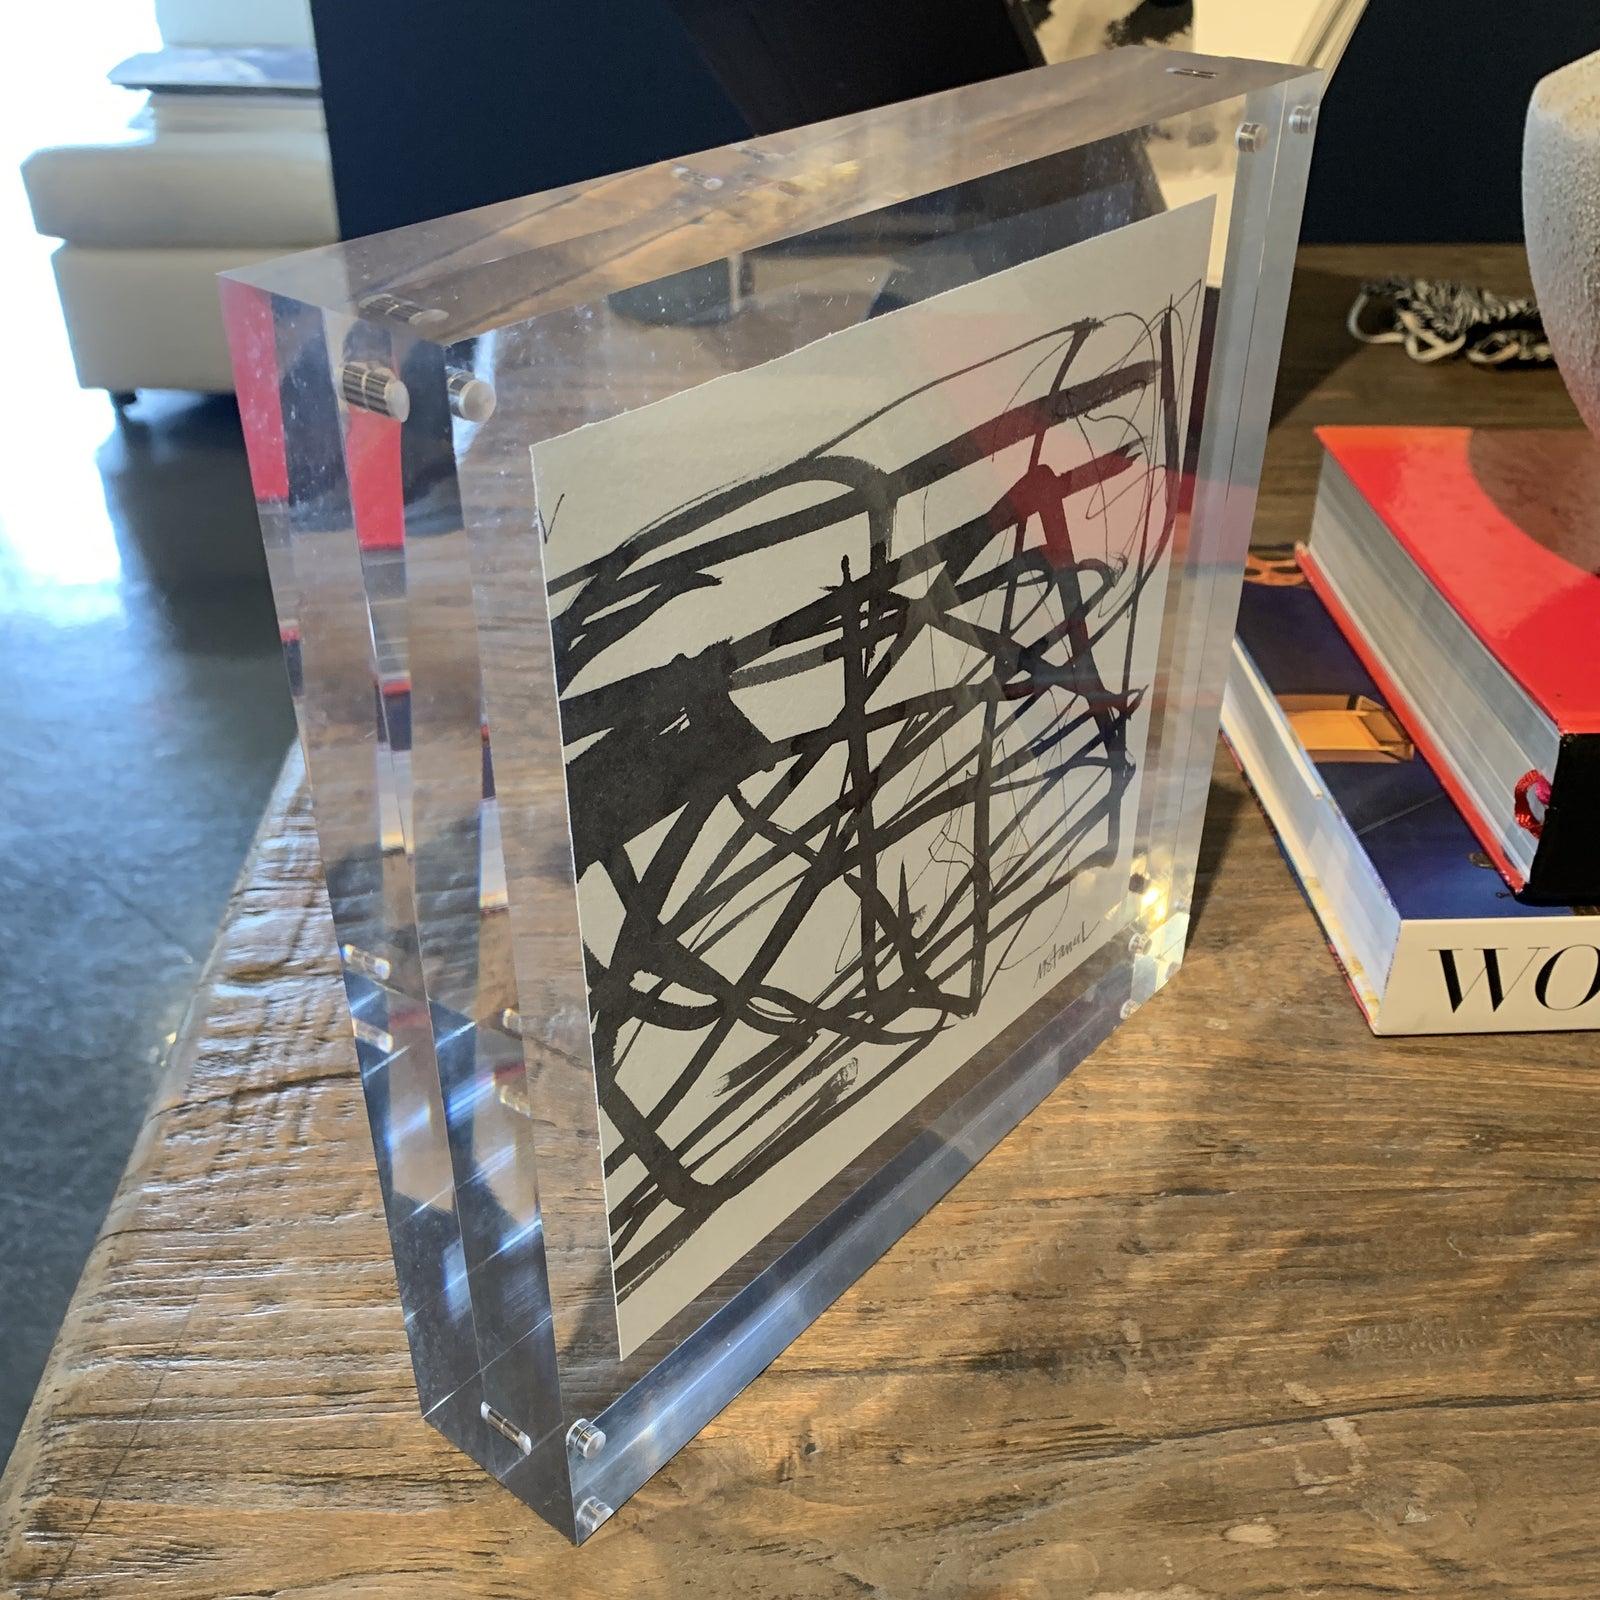 Artist : Michele Stancil 

10 x 10 Black and White abstract in very thick standing lucite 

Magnetic closure - the gallery has a collection of her work 